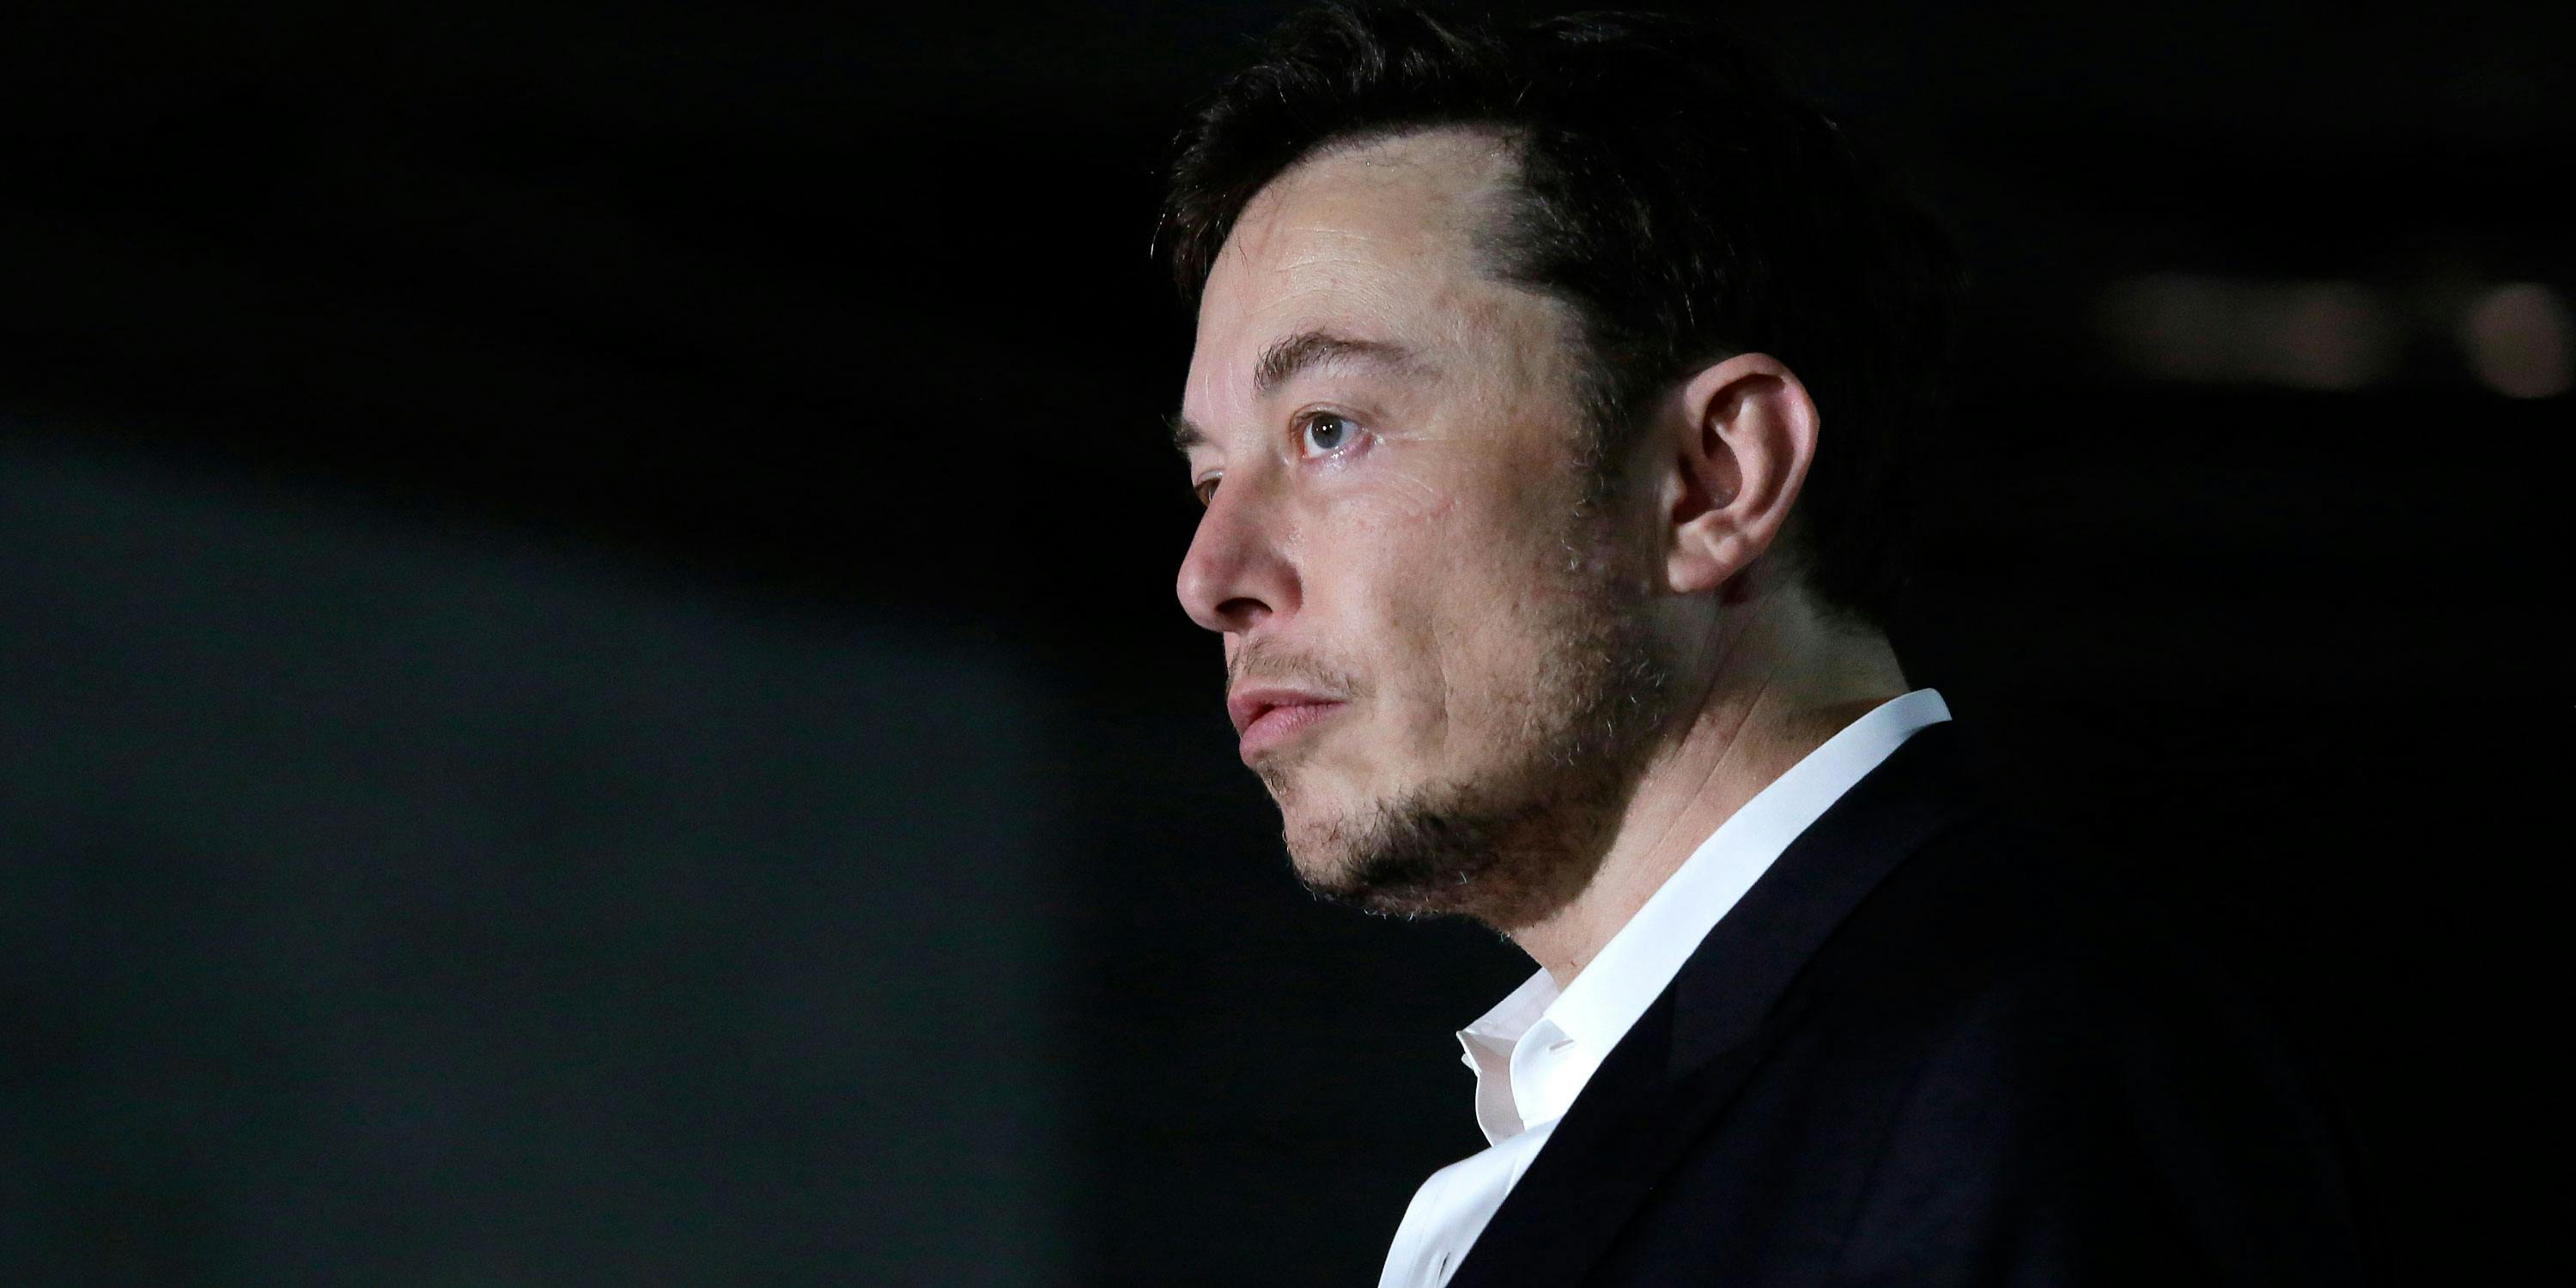 Engineer and tech entrepreneur Elon Musk of The Boring Company listens as Chicago Mayor Rahm Emanuel talks about constructing a high speed transit tunnel at Block 37 during a news conference on June 14, 2018 in Chicago, Illinois. Rumors surfaced last month that Elon Musk smokes weed, sparking concern among investors. After the rumors were confirmed on Friday, Tesla’s stock plummeted. (Photo by Joshua Lott/Getty Images)